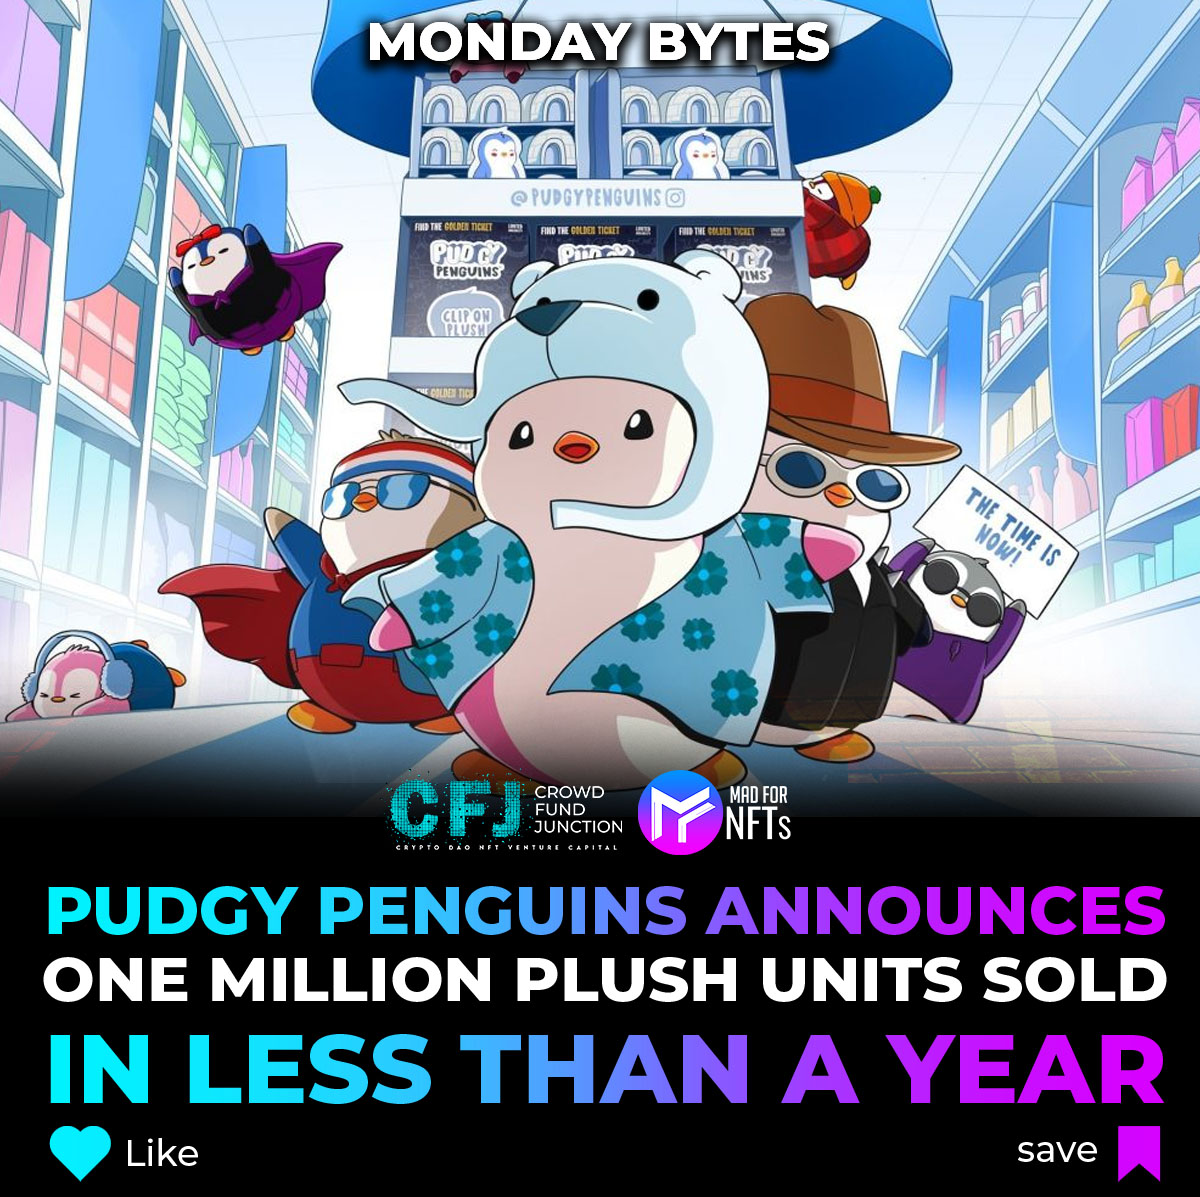 🚀 Pudgy Penguins announces one million plush units sold in less than a year 🐧 📃 Quick take Luca Netz, CEO of Pudgy Penguins, announced that over one million Pudgy Penguin plush toys have been sold in a video touting recent retail partnerships, including Hot Topic, Target, and…